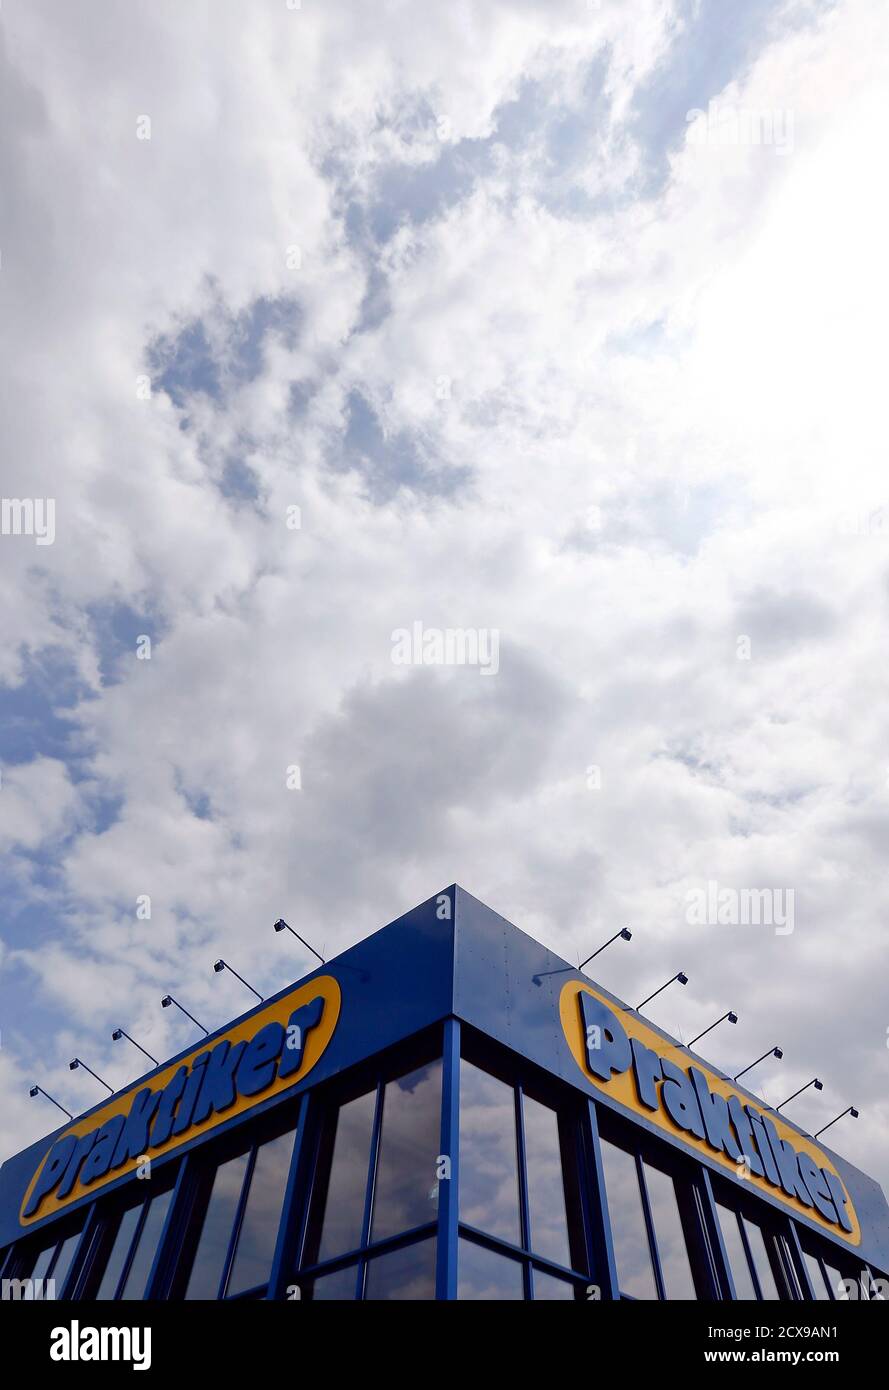 Clouds are pictured above the entrance of German do-it-yourself retailer Praktiker in Munich July 11, 2013. Praktiker said its main home improvement store business in Germany has filed for insolvency on Thursday. The company said that the directors of the businesses that operate Praktiker and extra-BAU+HOBBY stores in Germany asked a Hamburg court to open insolvency proceedings on grounds of over-indebtedness.   REUTERS/Michael Dalder   (GERMANY - Tags: BUSINESS) Stock Photo